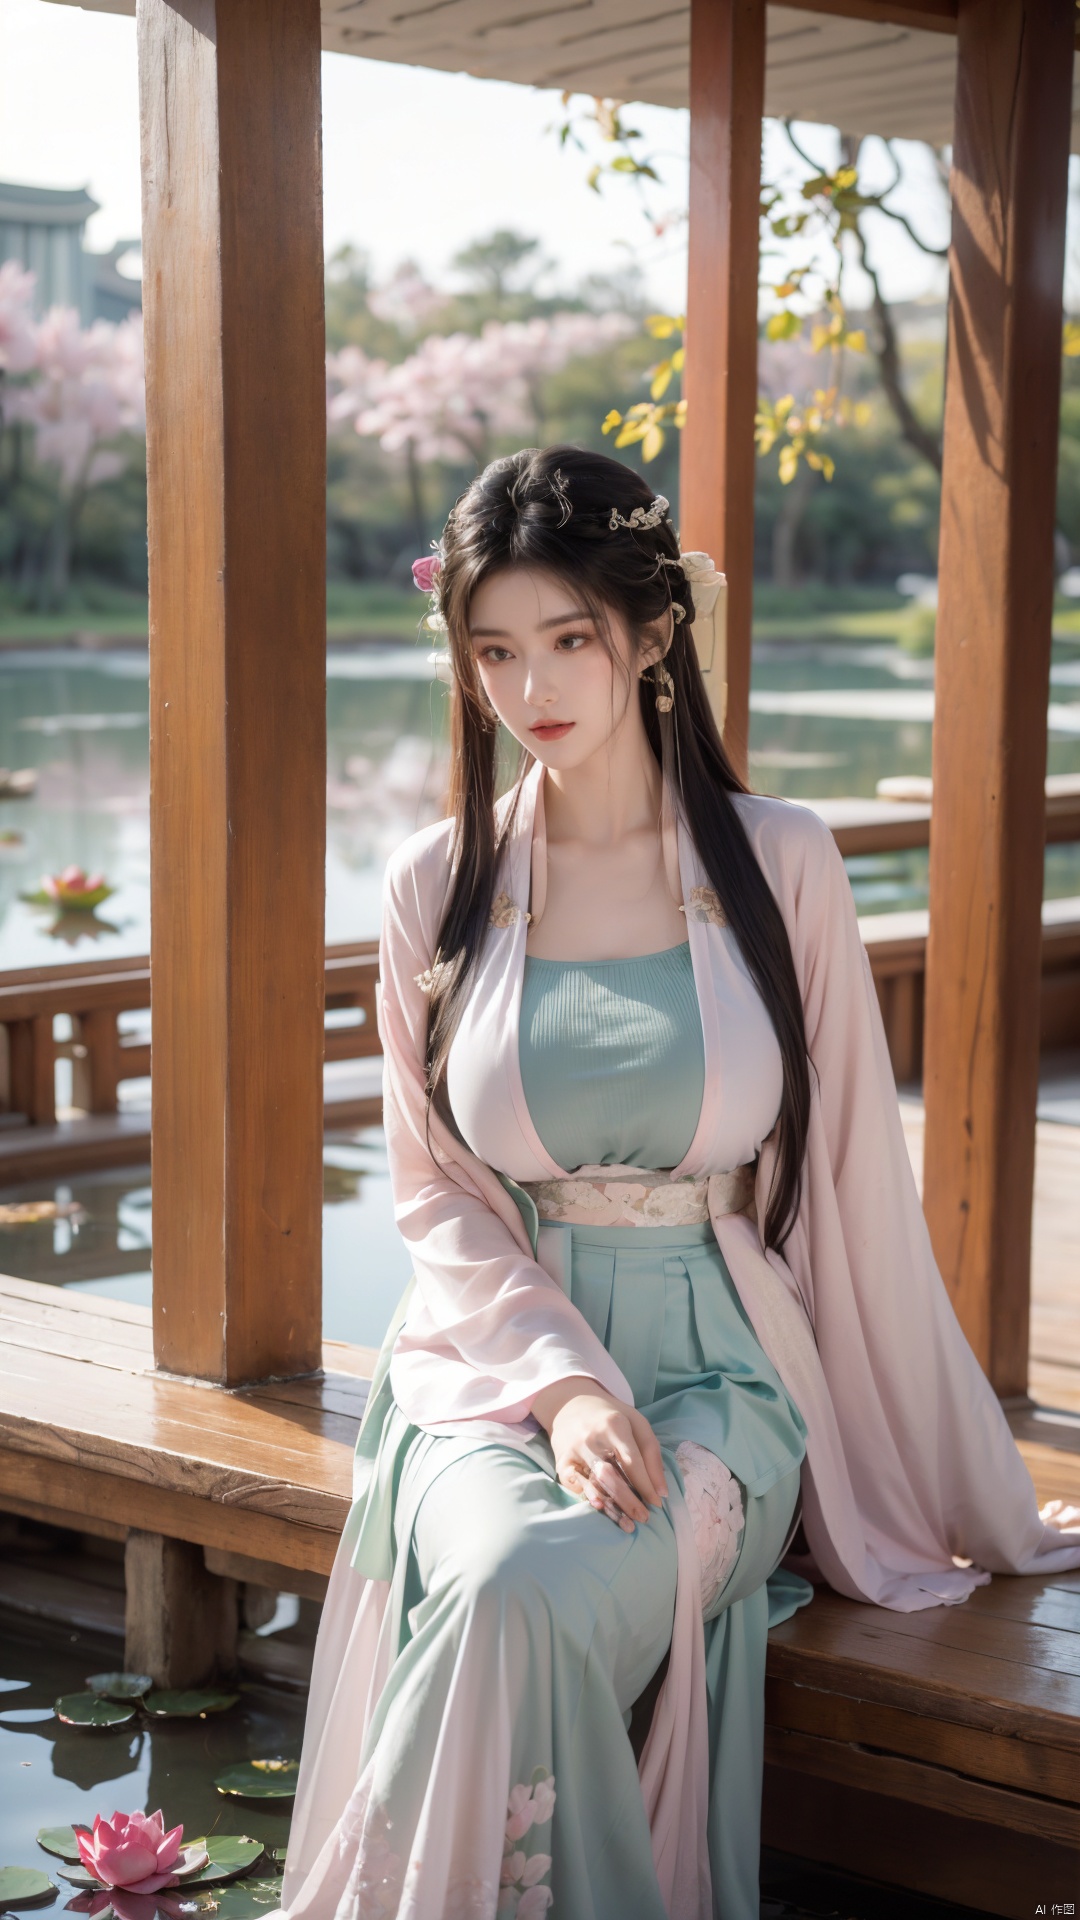  (1girl:1.1), (Lace pink-green skirt:1.39), on Stomach,aqua_earrings,Lights, lanterns, chang,(big breasts:1.56),hanfu, Best quality, Realistic, photorealistic, masterpiece, extremely detailed CG unity 8k wallpaper, best illumination, best shadow, huge filesize ,(huge breasts:1.59) incredibly absurdres, absurdres, looking at viewer, transparent, smog, gauze, vase, petals, room, ancient Chinese style, detailed background, wide shot background,
(((black hair))),(Sitting on the lotus pond porch:1.49) ,(A pond full of pink lotus flowers:1.5),close up of 1girl,Hairpins,hair ornament,hair wings,slim,narrow waist,perfect eyes,beautiful perfect face,pleasant smile,perfect female figure,detailed skin,charming,alluring,seductive,erotic,enchanting,delicate pattern,detailed complex and rich exquisite clothing detail,delicate intricate fabrics,
Morning Serenade In the gentle morning glow, (a woman in a pink lotus-patterned Hanfu stands in an indoor courtyard:1.36),(Chinese traditional dragon and phoenix embroidered Hanfu:1.3), admiring the tranquil garden scenery. The lotus-patterned Hanfu, embellished with silver-thread embroidery, is softly illuminated by the morning light. The light mint green Hanfu imparts a sense of calm and freshness, adorned with delicate lotus patterns, with a blurred background to enhance the peaceful atmosphere, song_hanfu